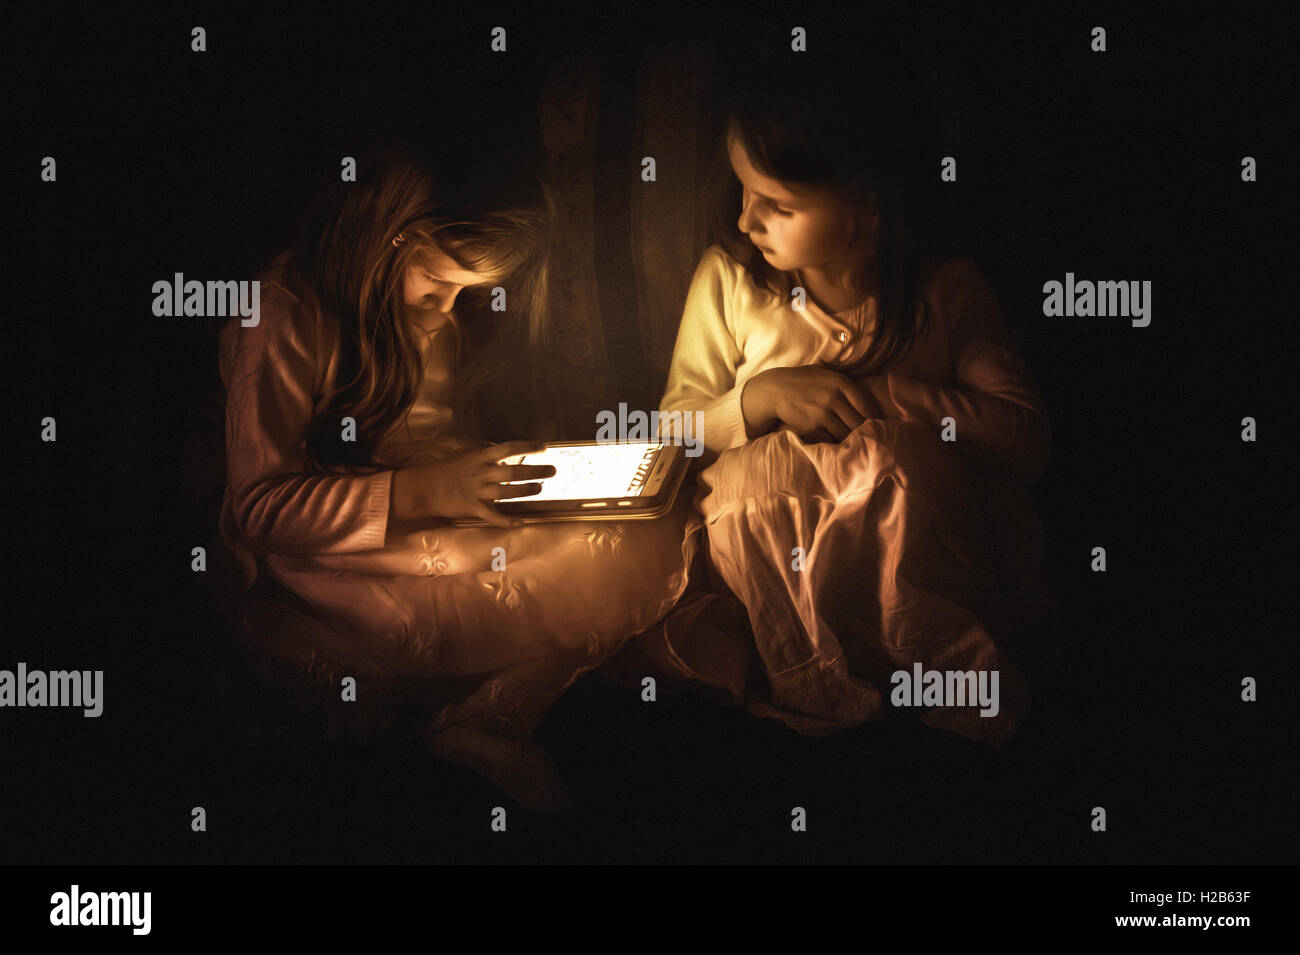 two small girls siting on the coach and looking at the lit tablet Stock Photo